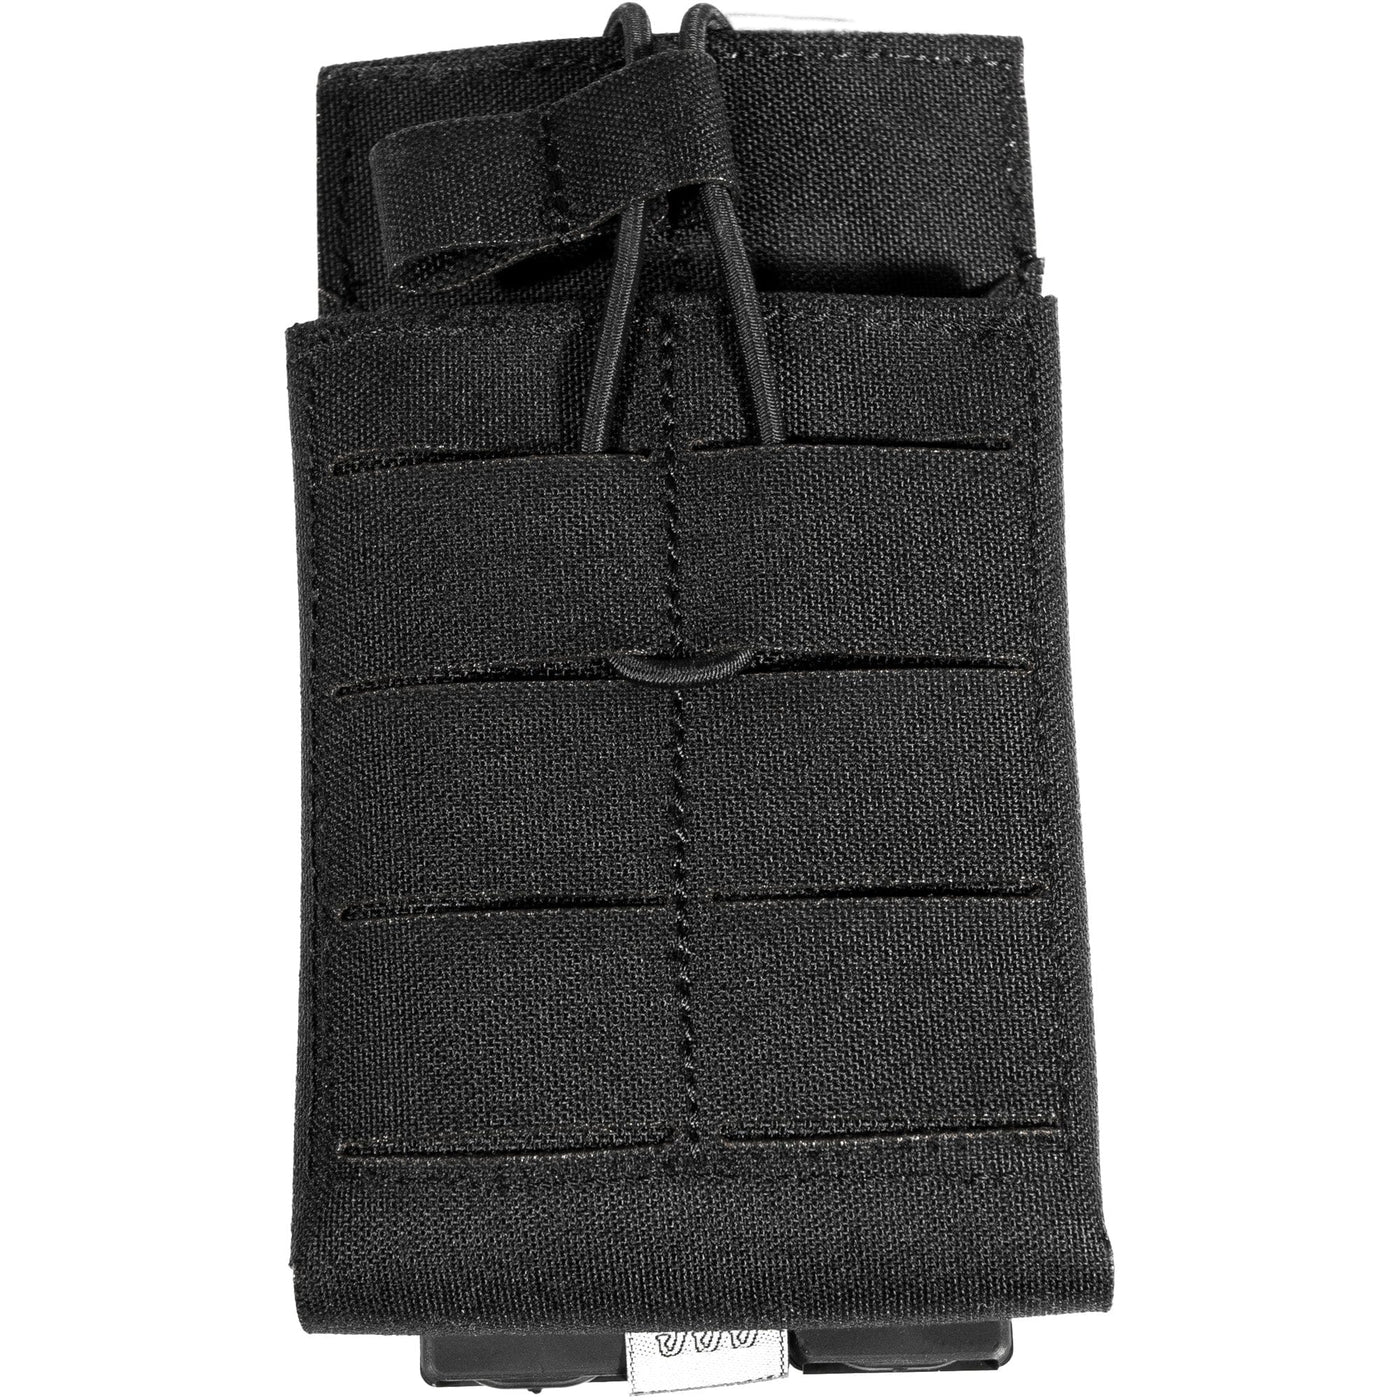 Grey Ghost Gear Ggg Single 7.62 Mag Pouch Black Holsters